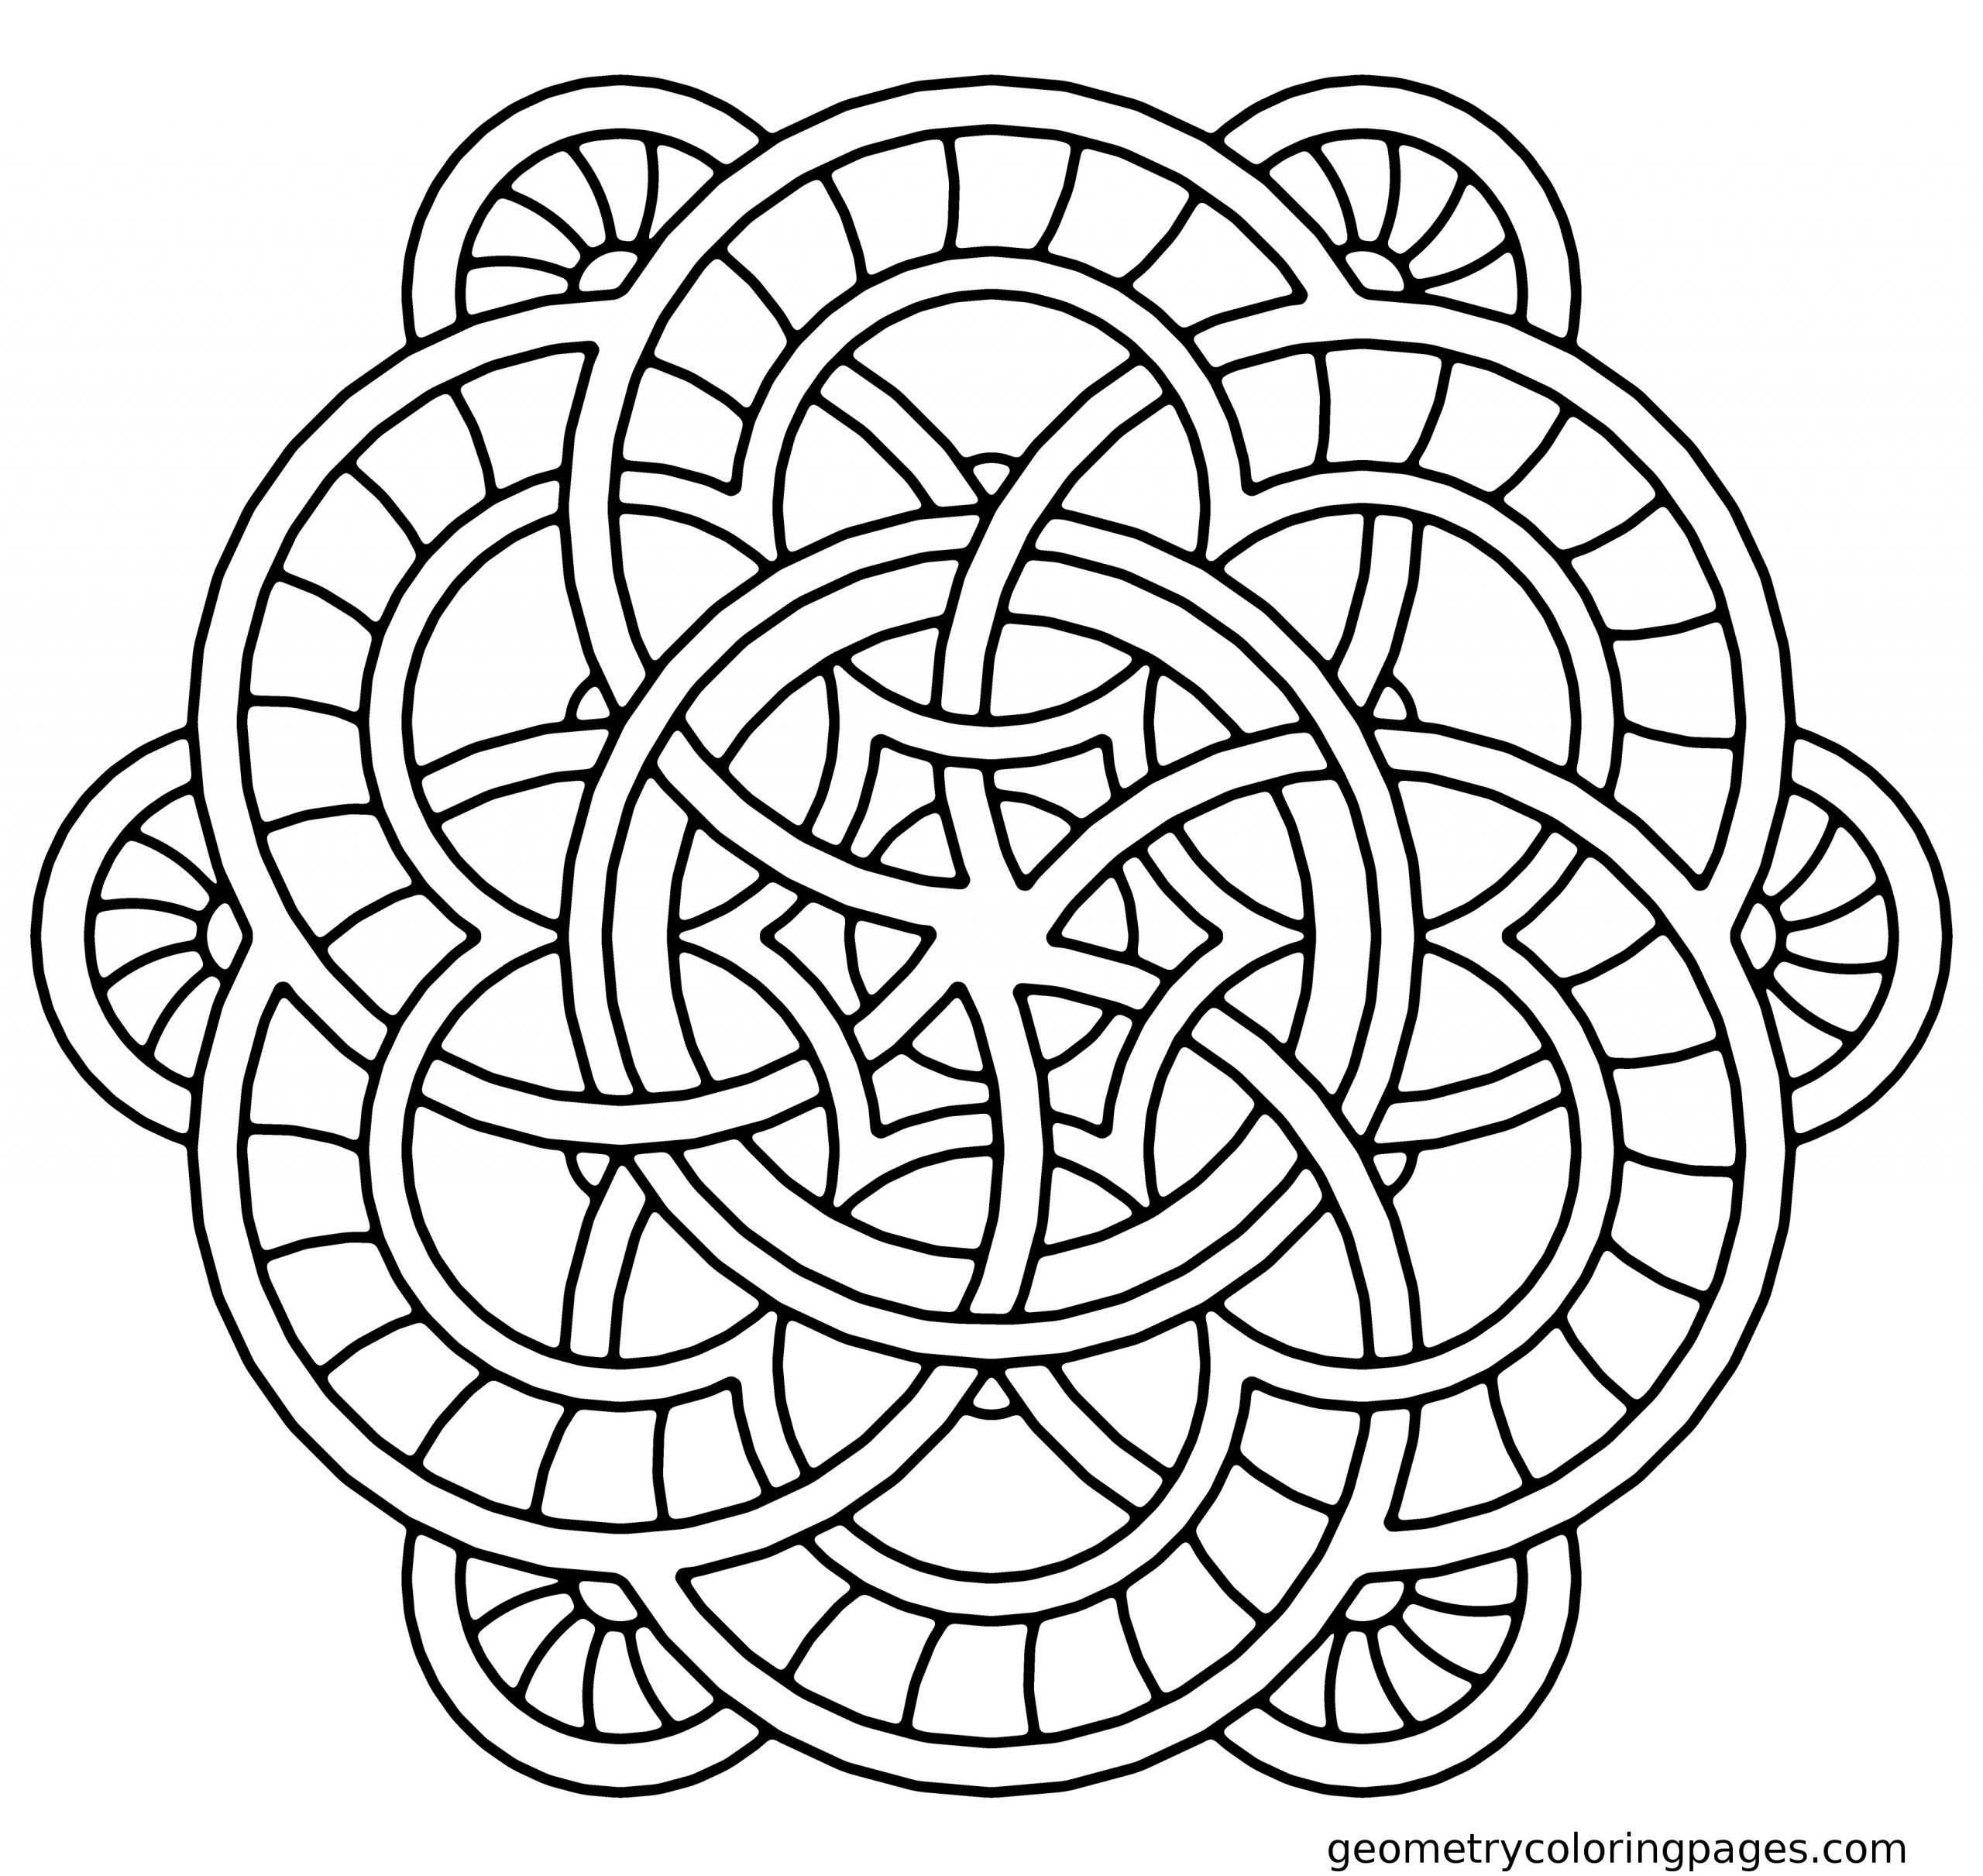 Mandala Coloring Pages For Kids
 Coloring Pages Adult Mandala Coloring Pages Free